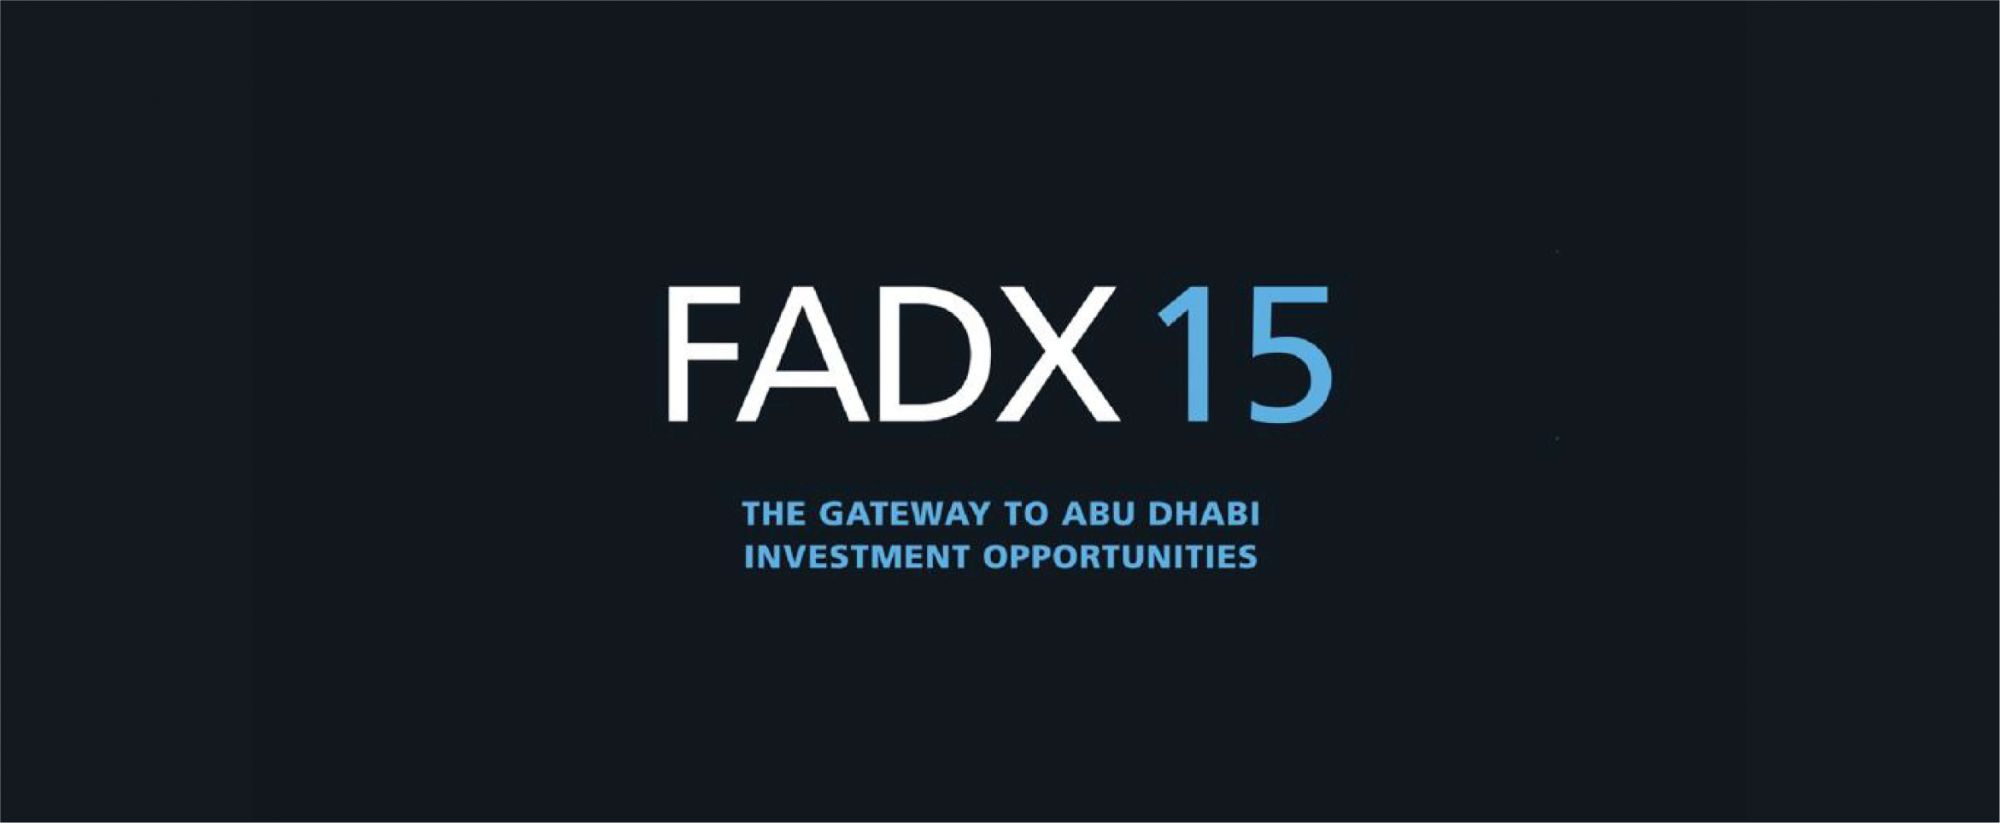 Multiply Group Included In New Benchmark FTSE ADX 15 Index Of Abu Dhabi’s Largest, Most Liquid Stocks